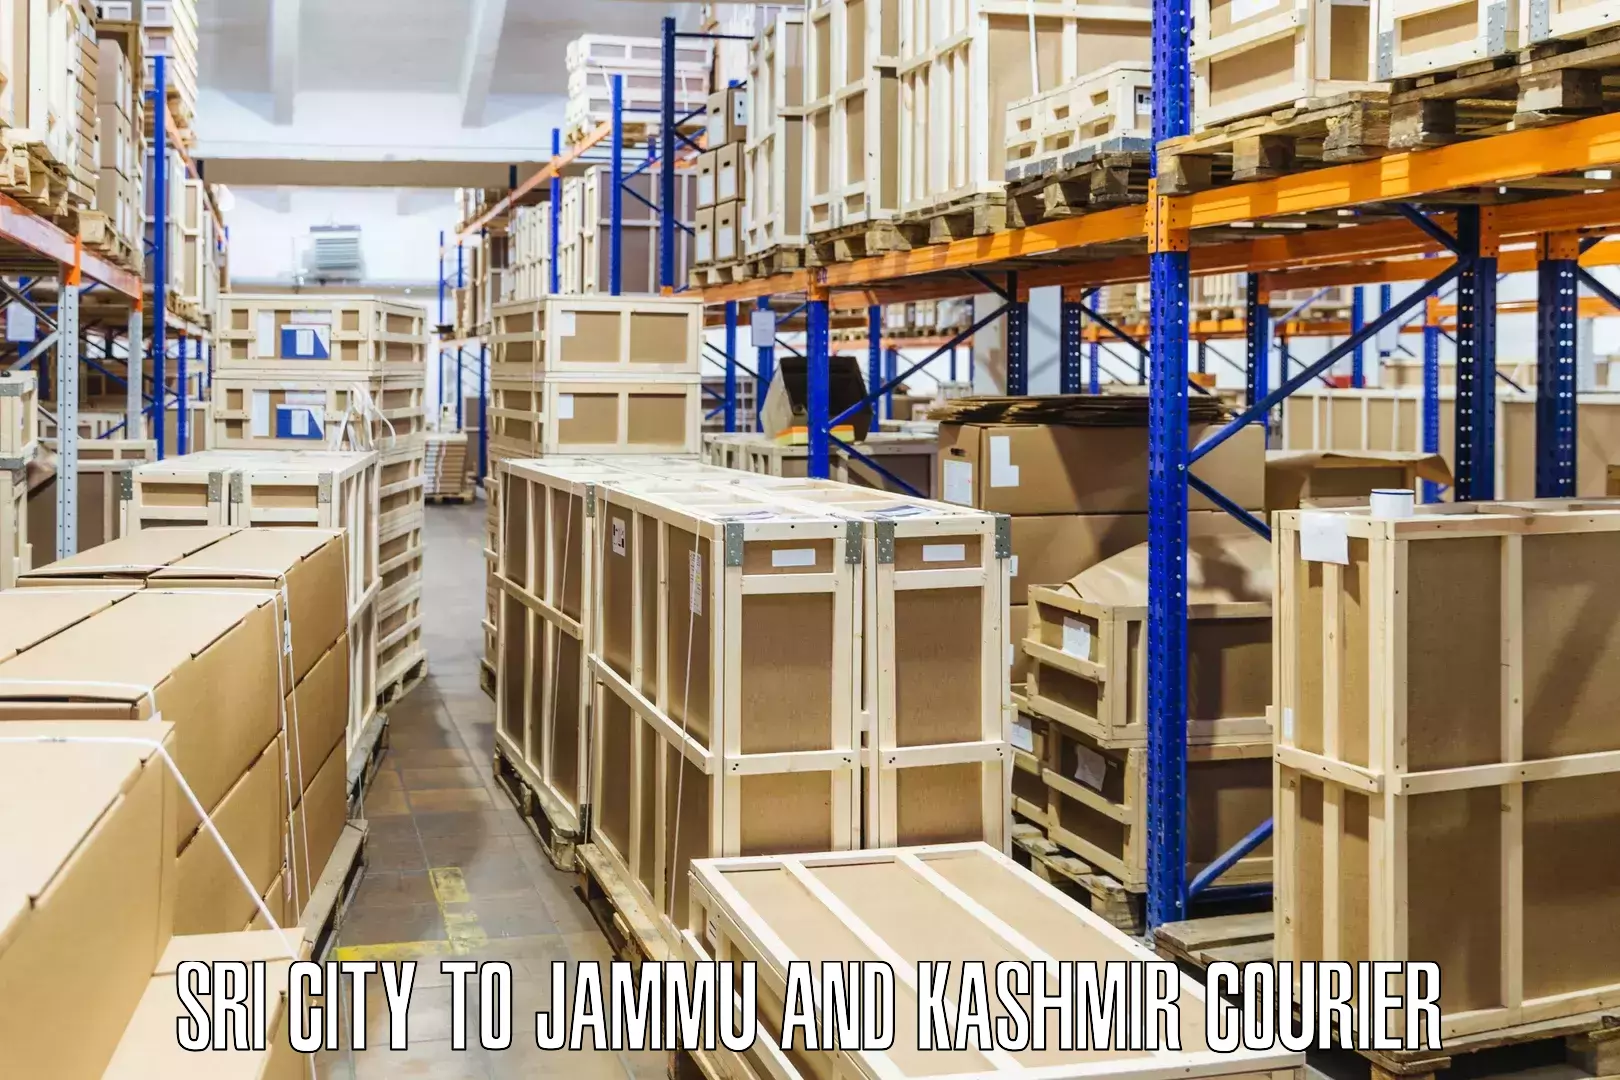 Express package services Sri City to University of Jammu